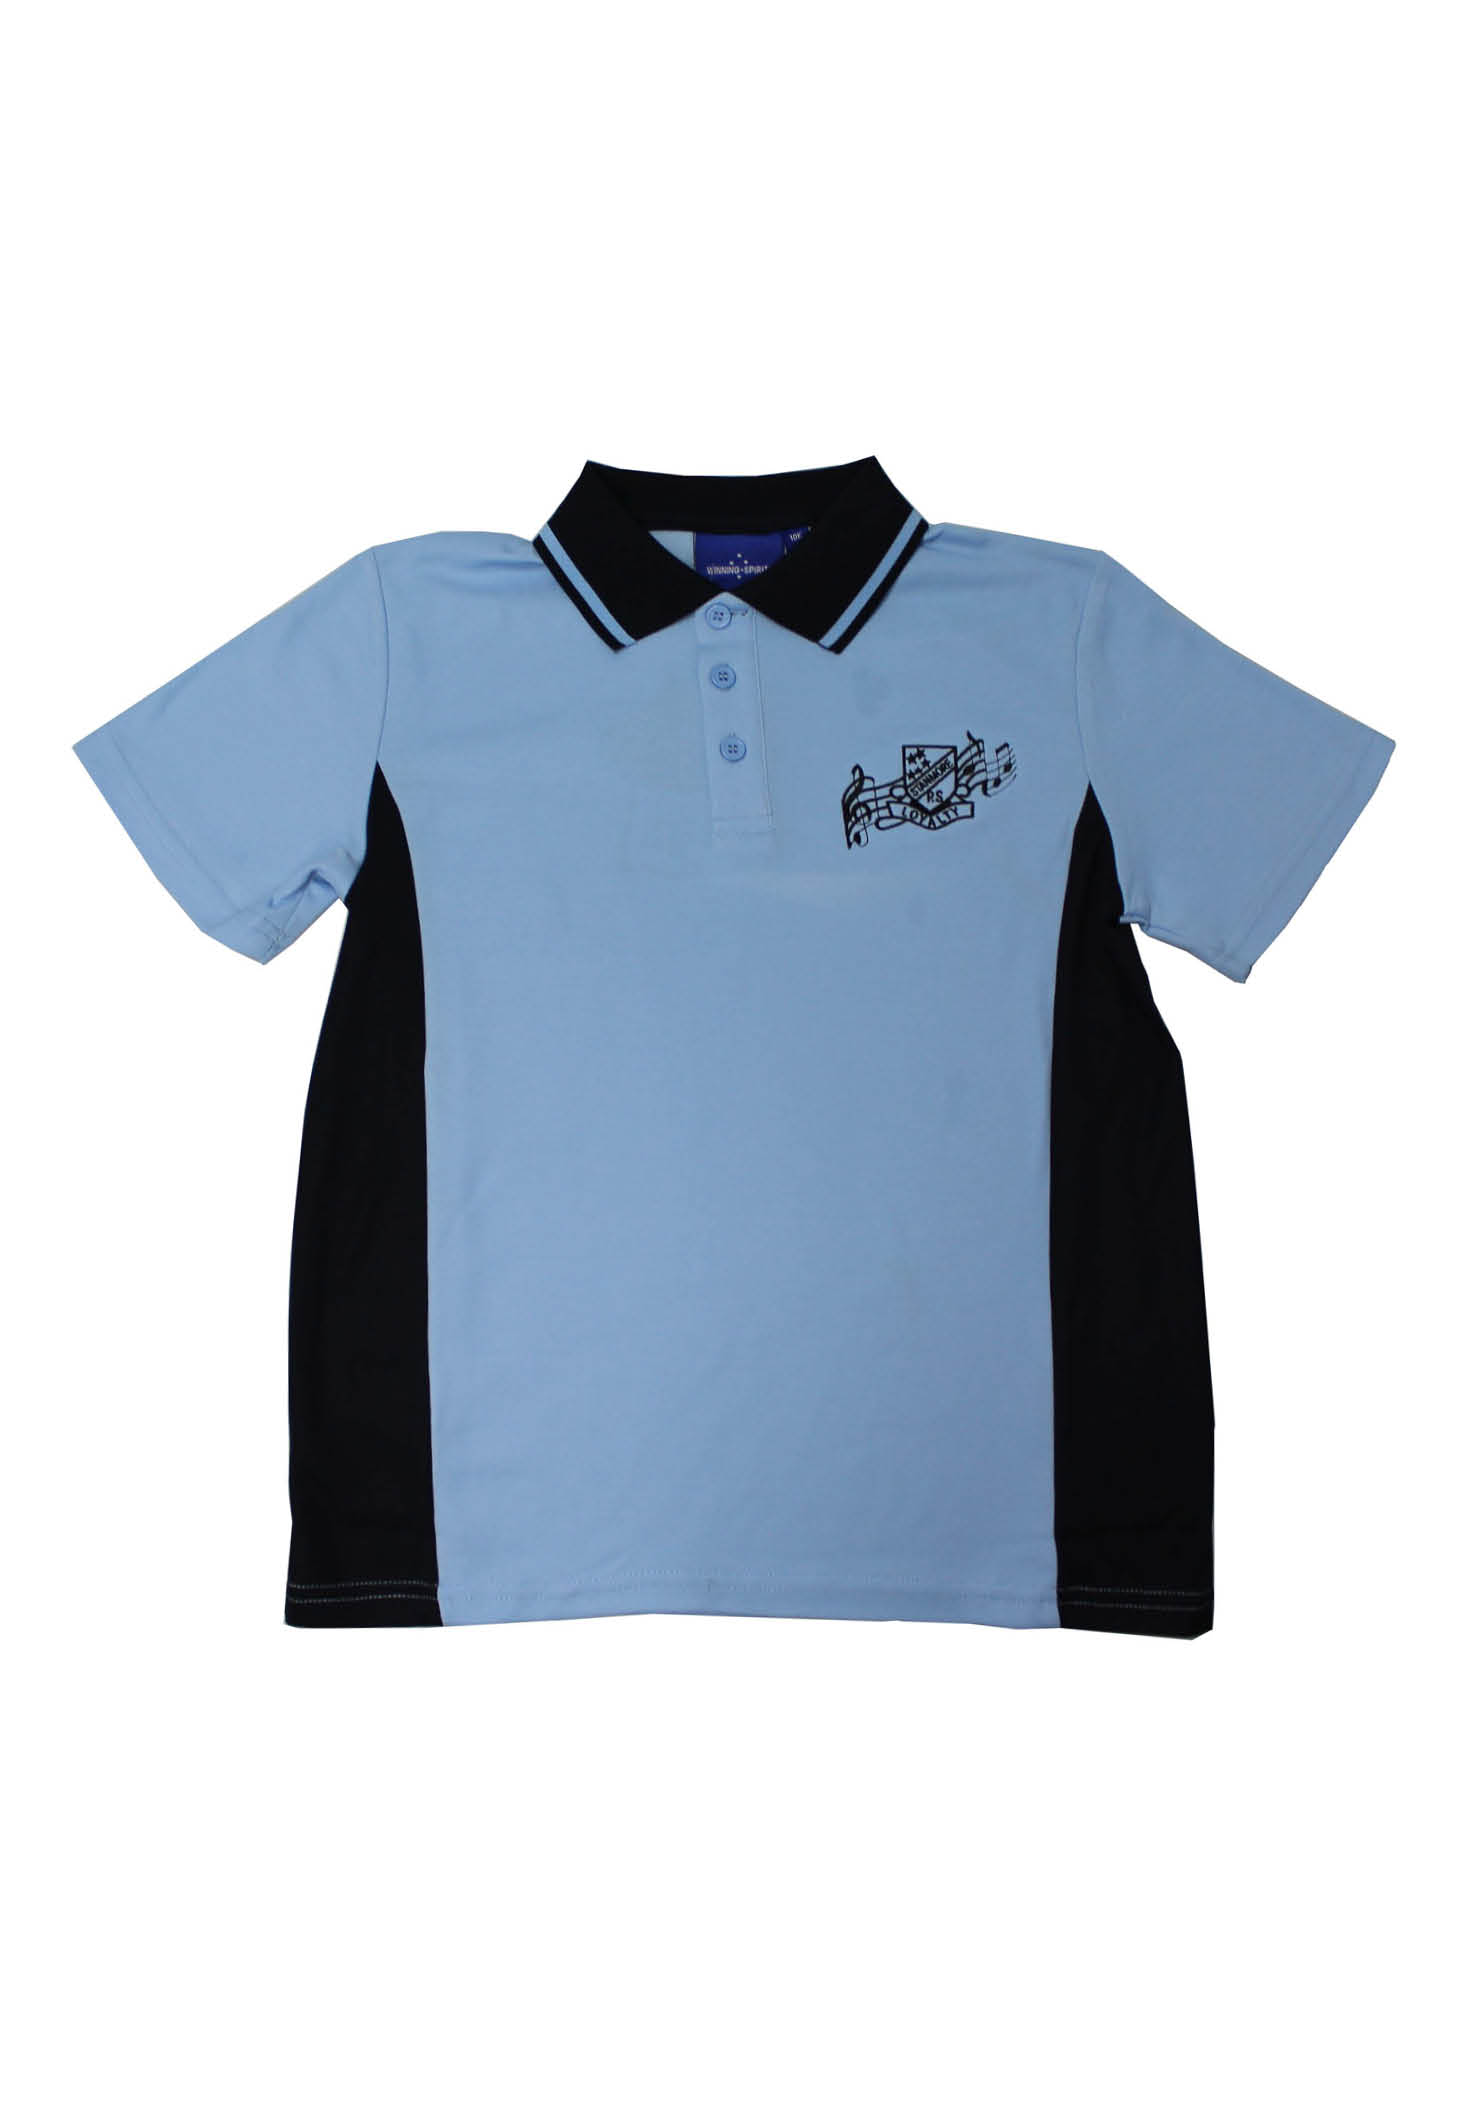 Stanmore Unisex Music Polo Shirt | Shop at Pickles Schoolwear | School ...